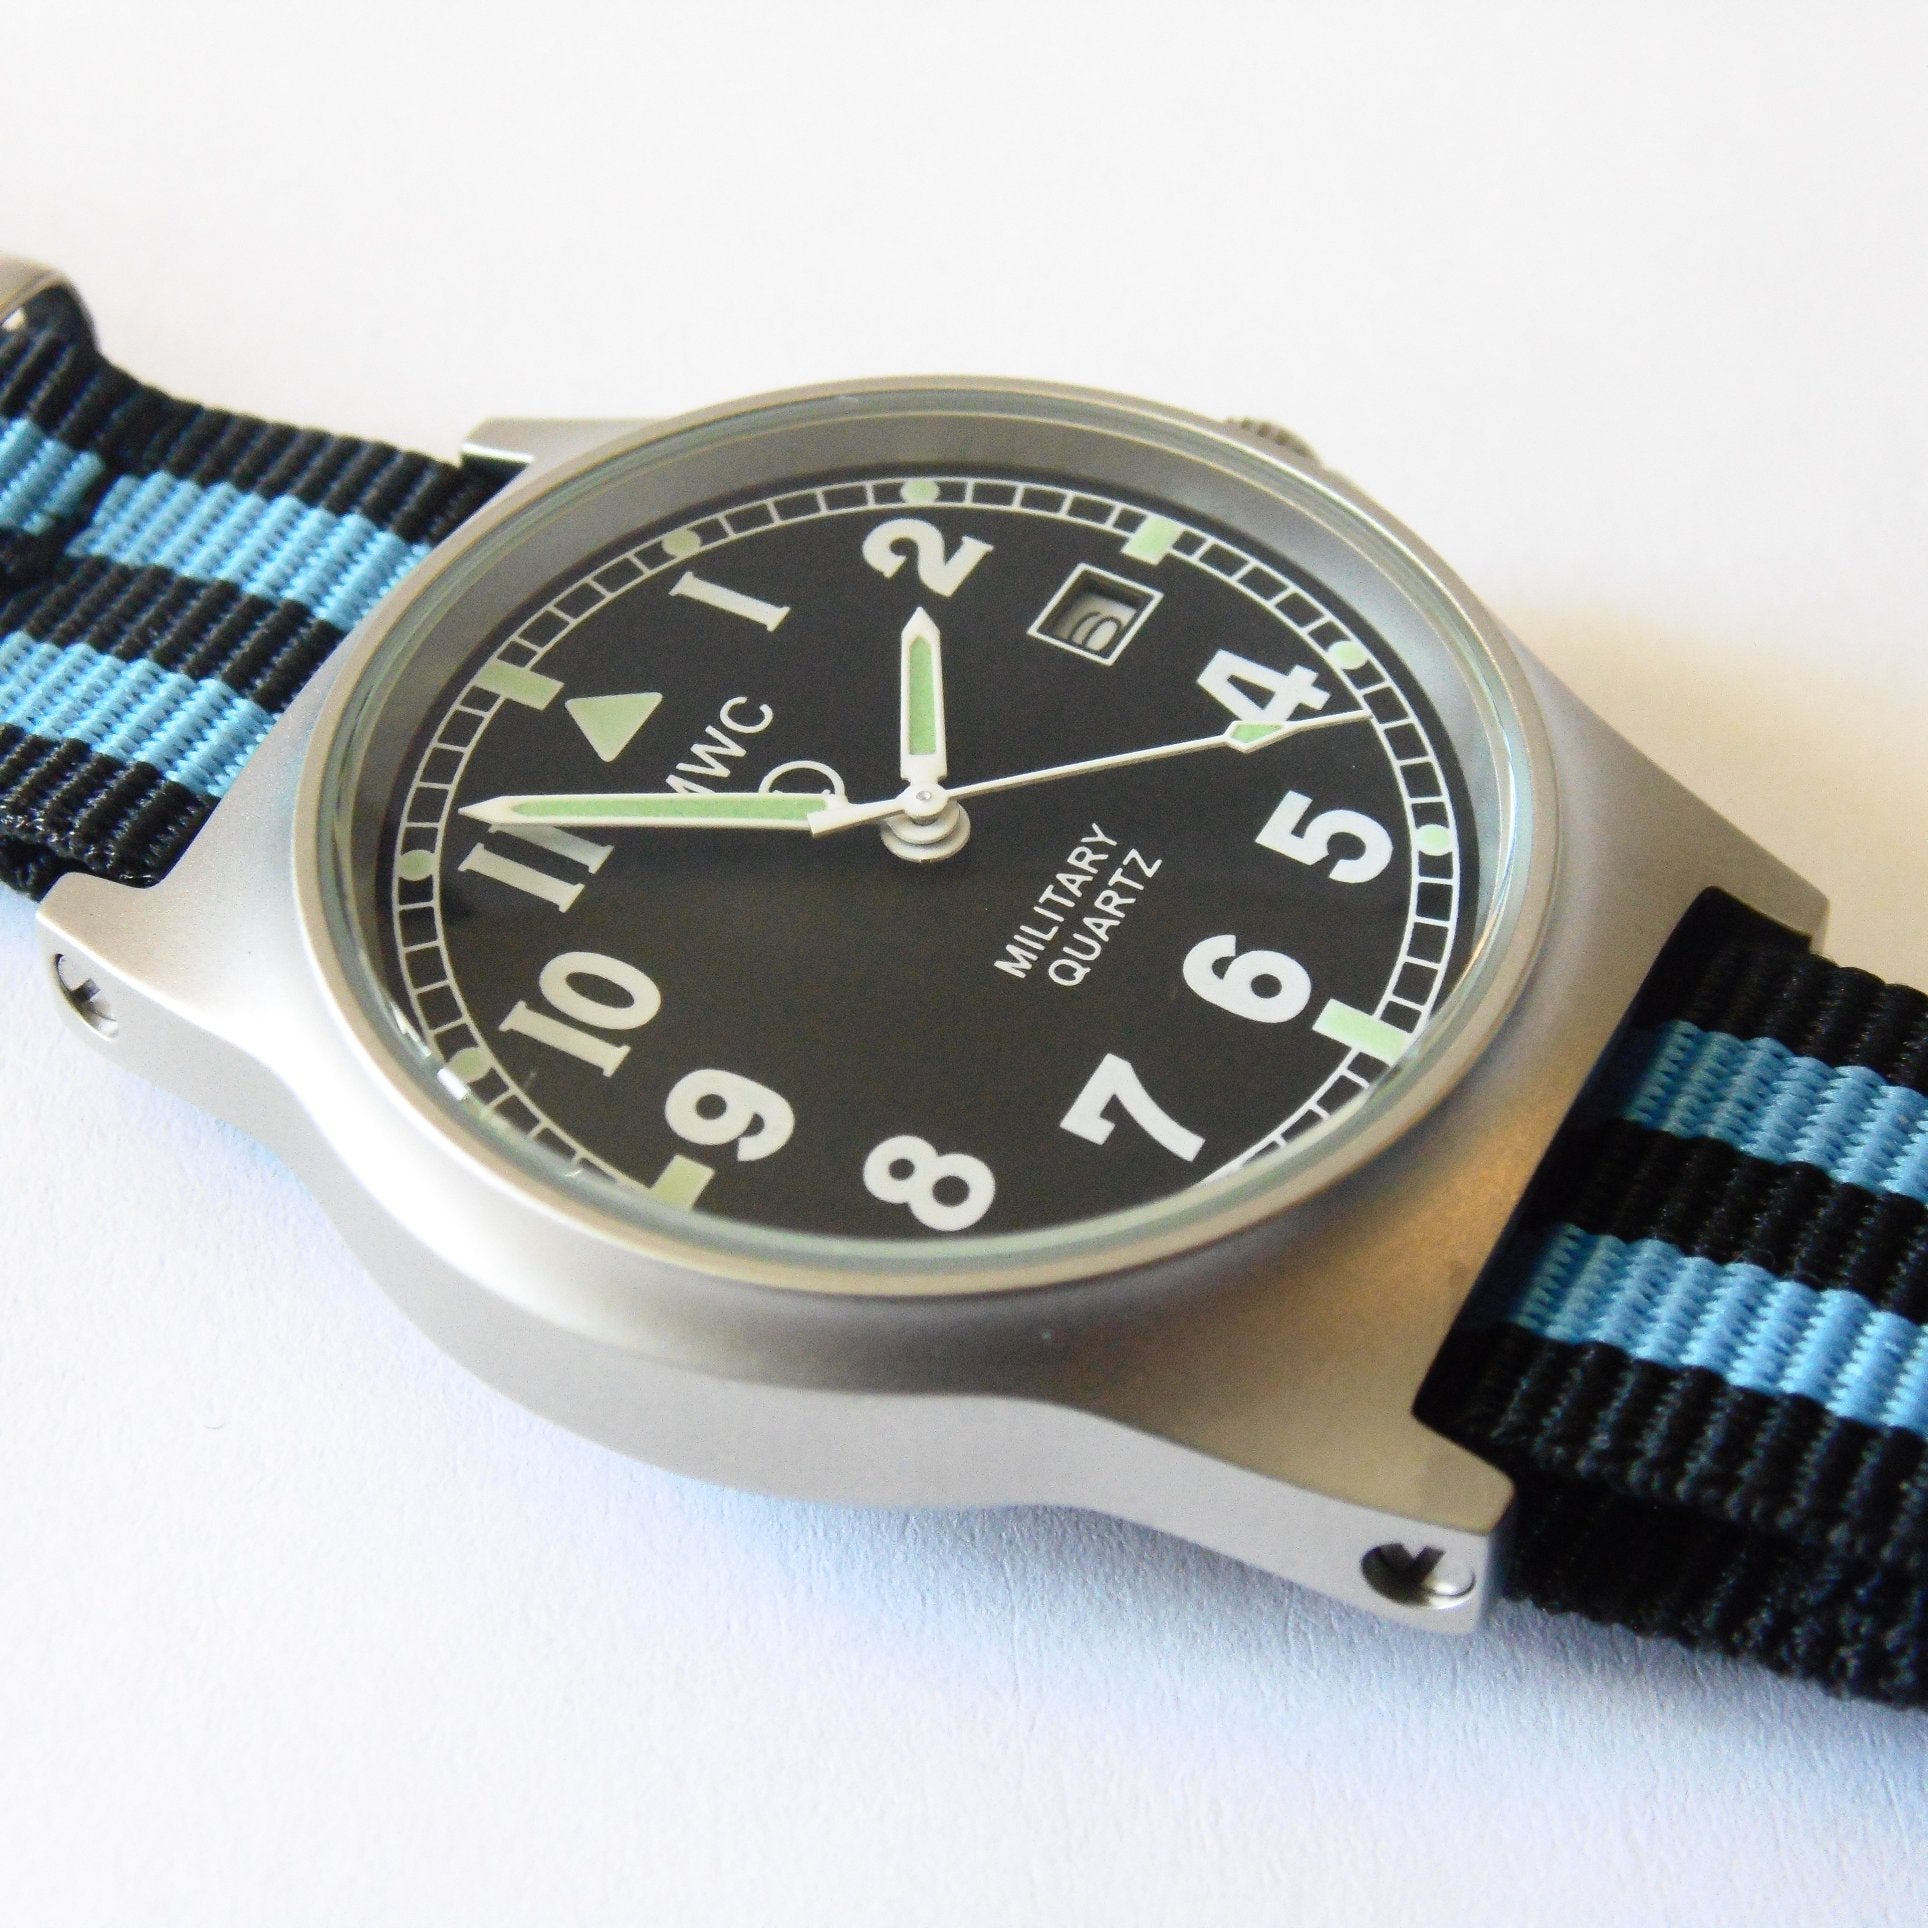 MWC G10 LM Military Watch (Black and Blue Nato Strap) - Watchfinder General - UK suppliers of Russian Vostok Parnis Watches MWC G10
 - 2